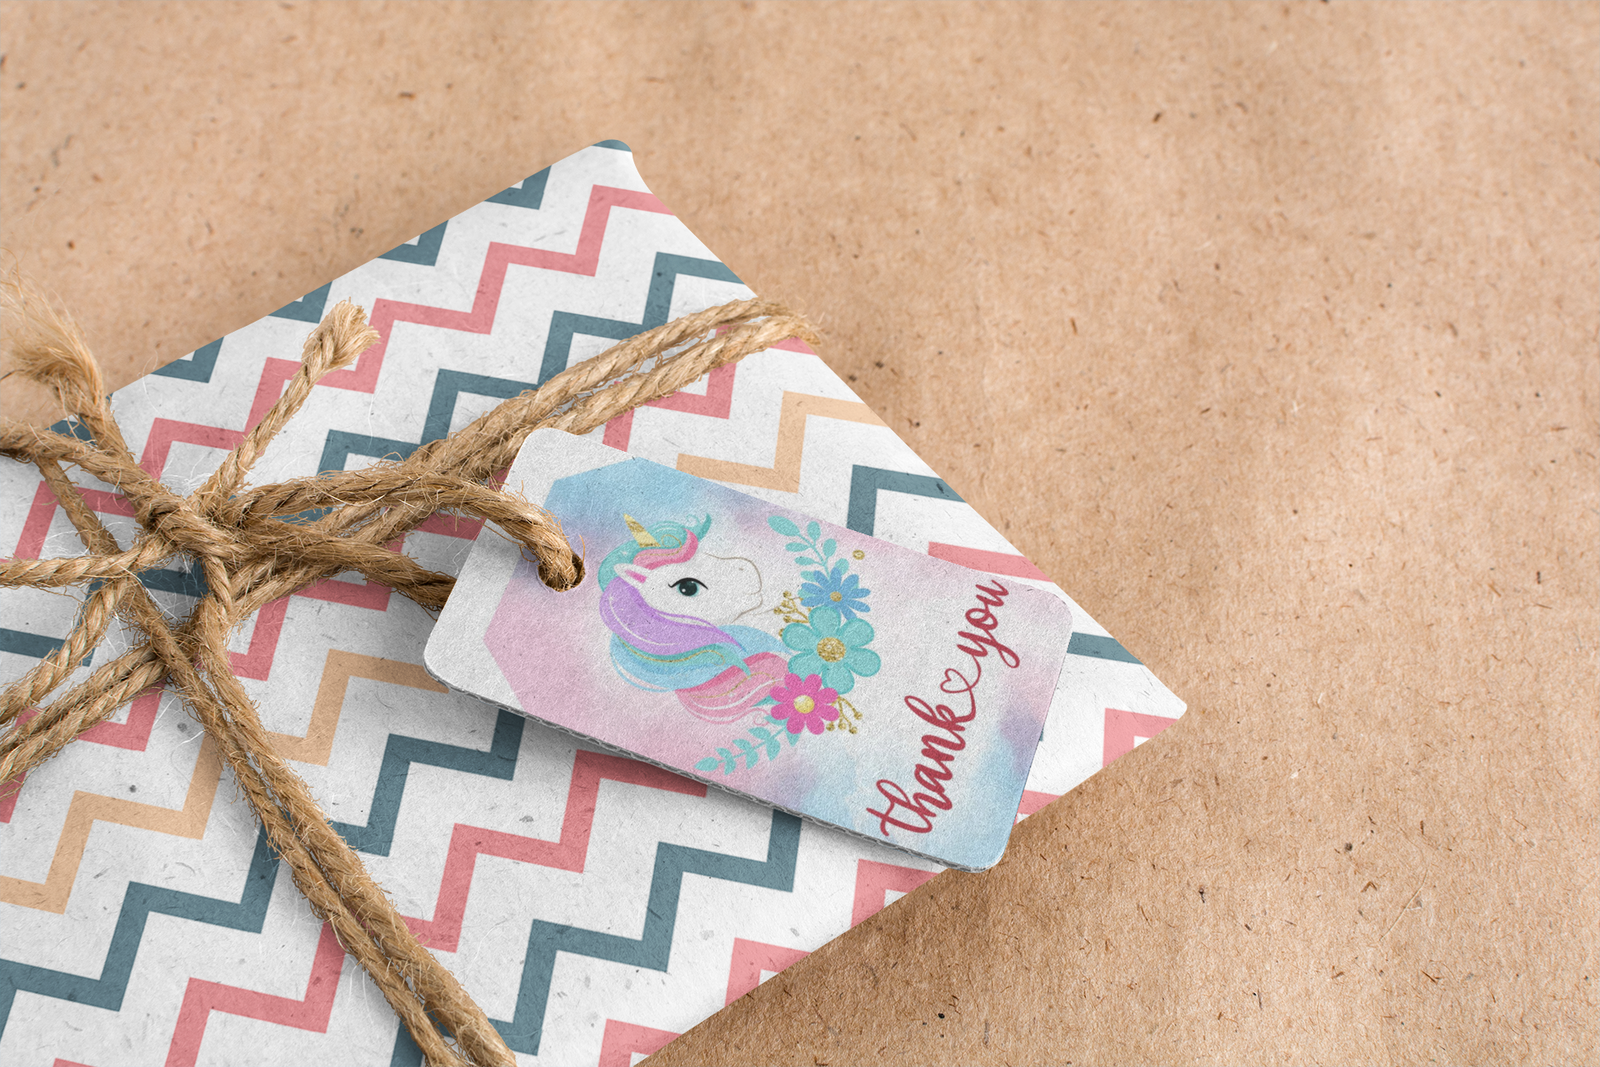 Unicorn Theme Model 4 Birthday Favour Tags (2 x 3.5 inches/250 GSM Cardstock/Multicolour/30Pcs)